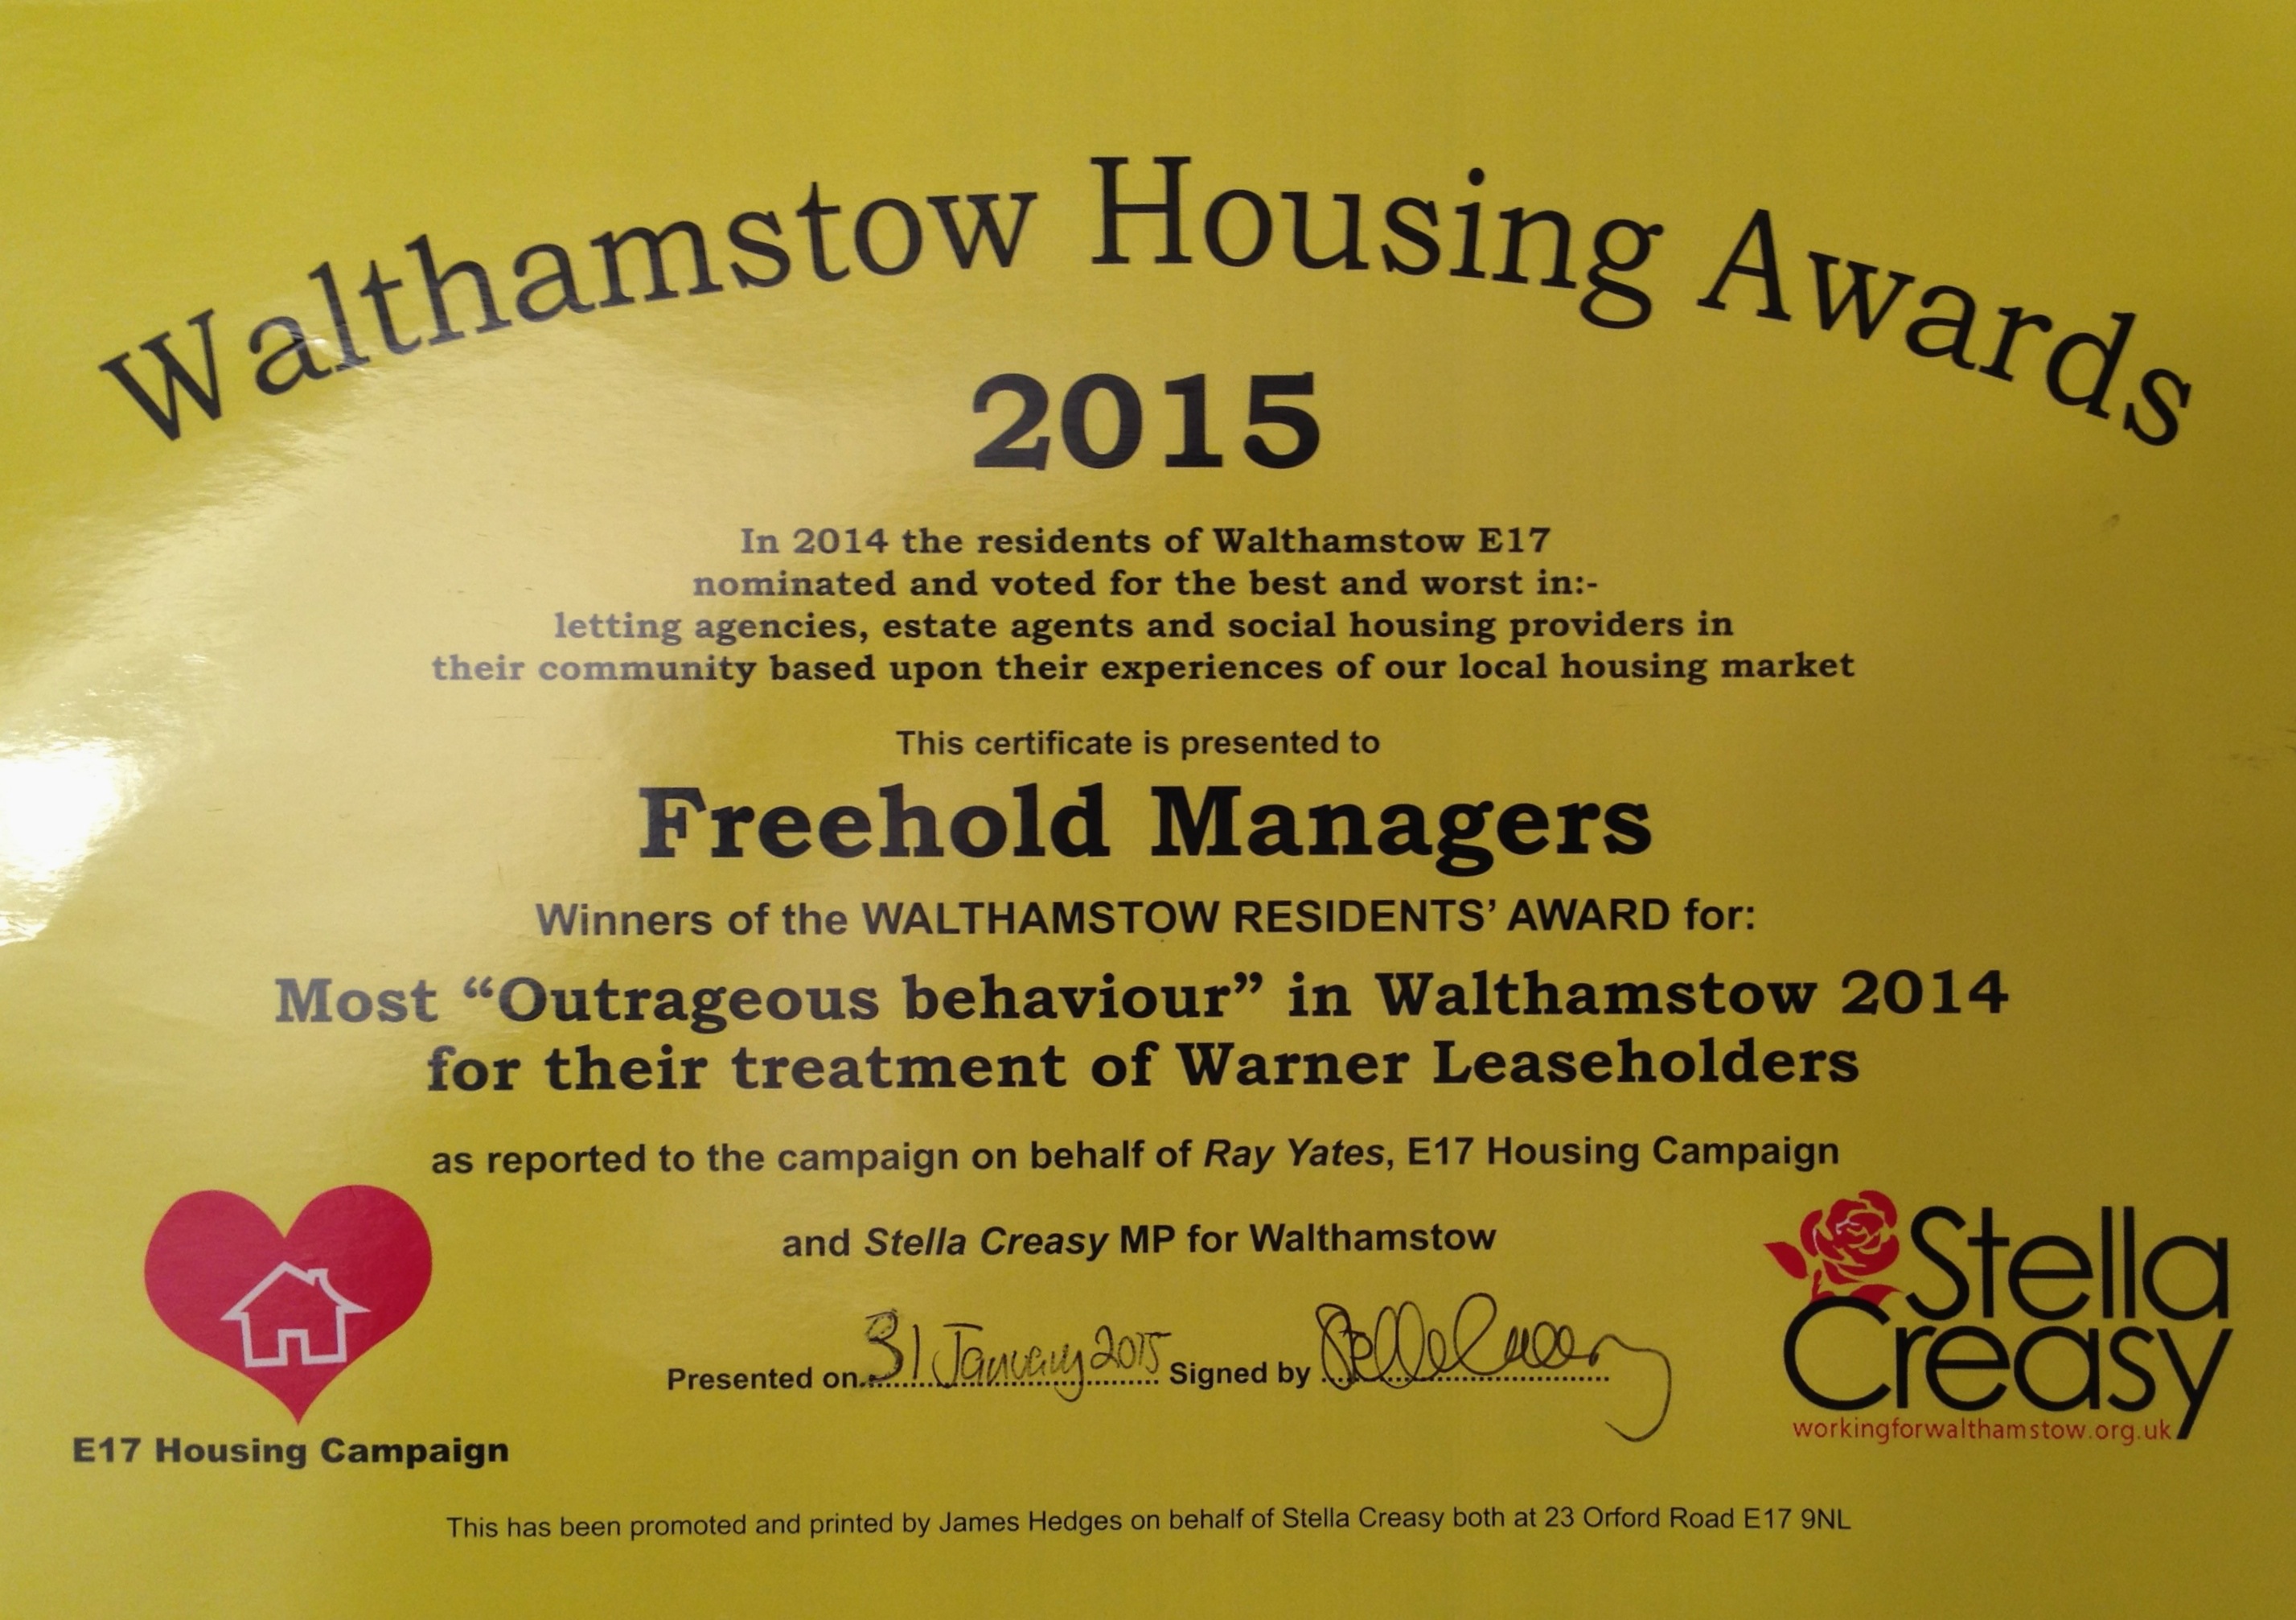 Walthamstow Housing Award to Freehold Managers